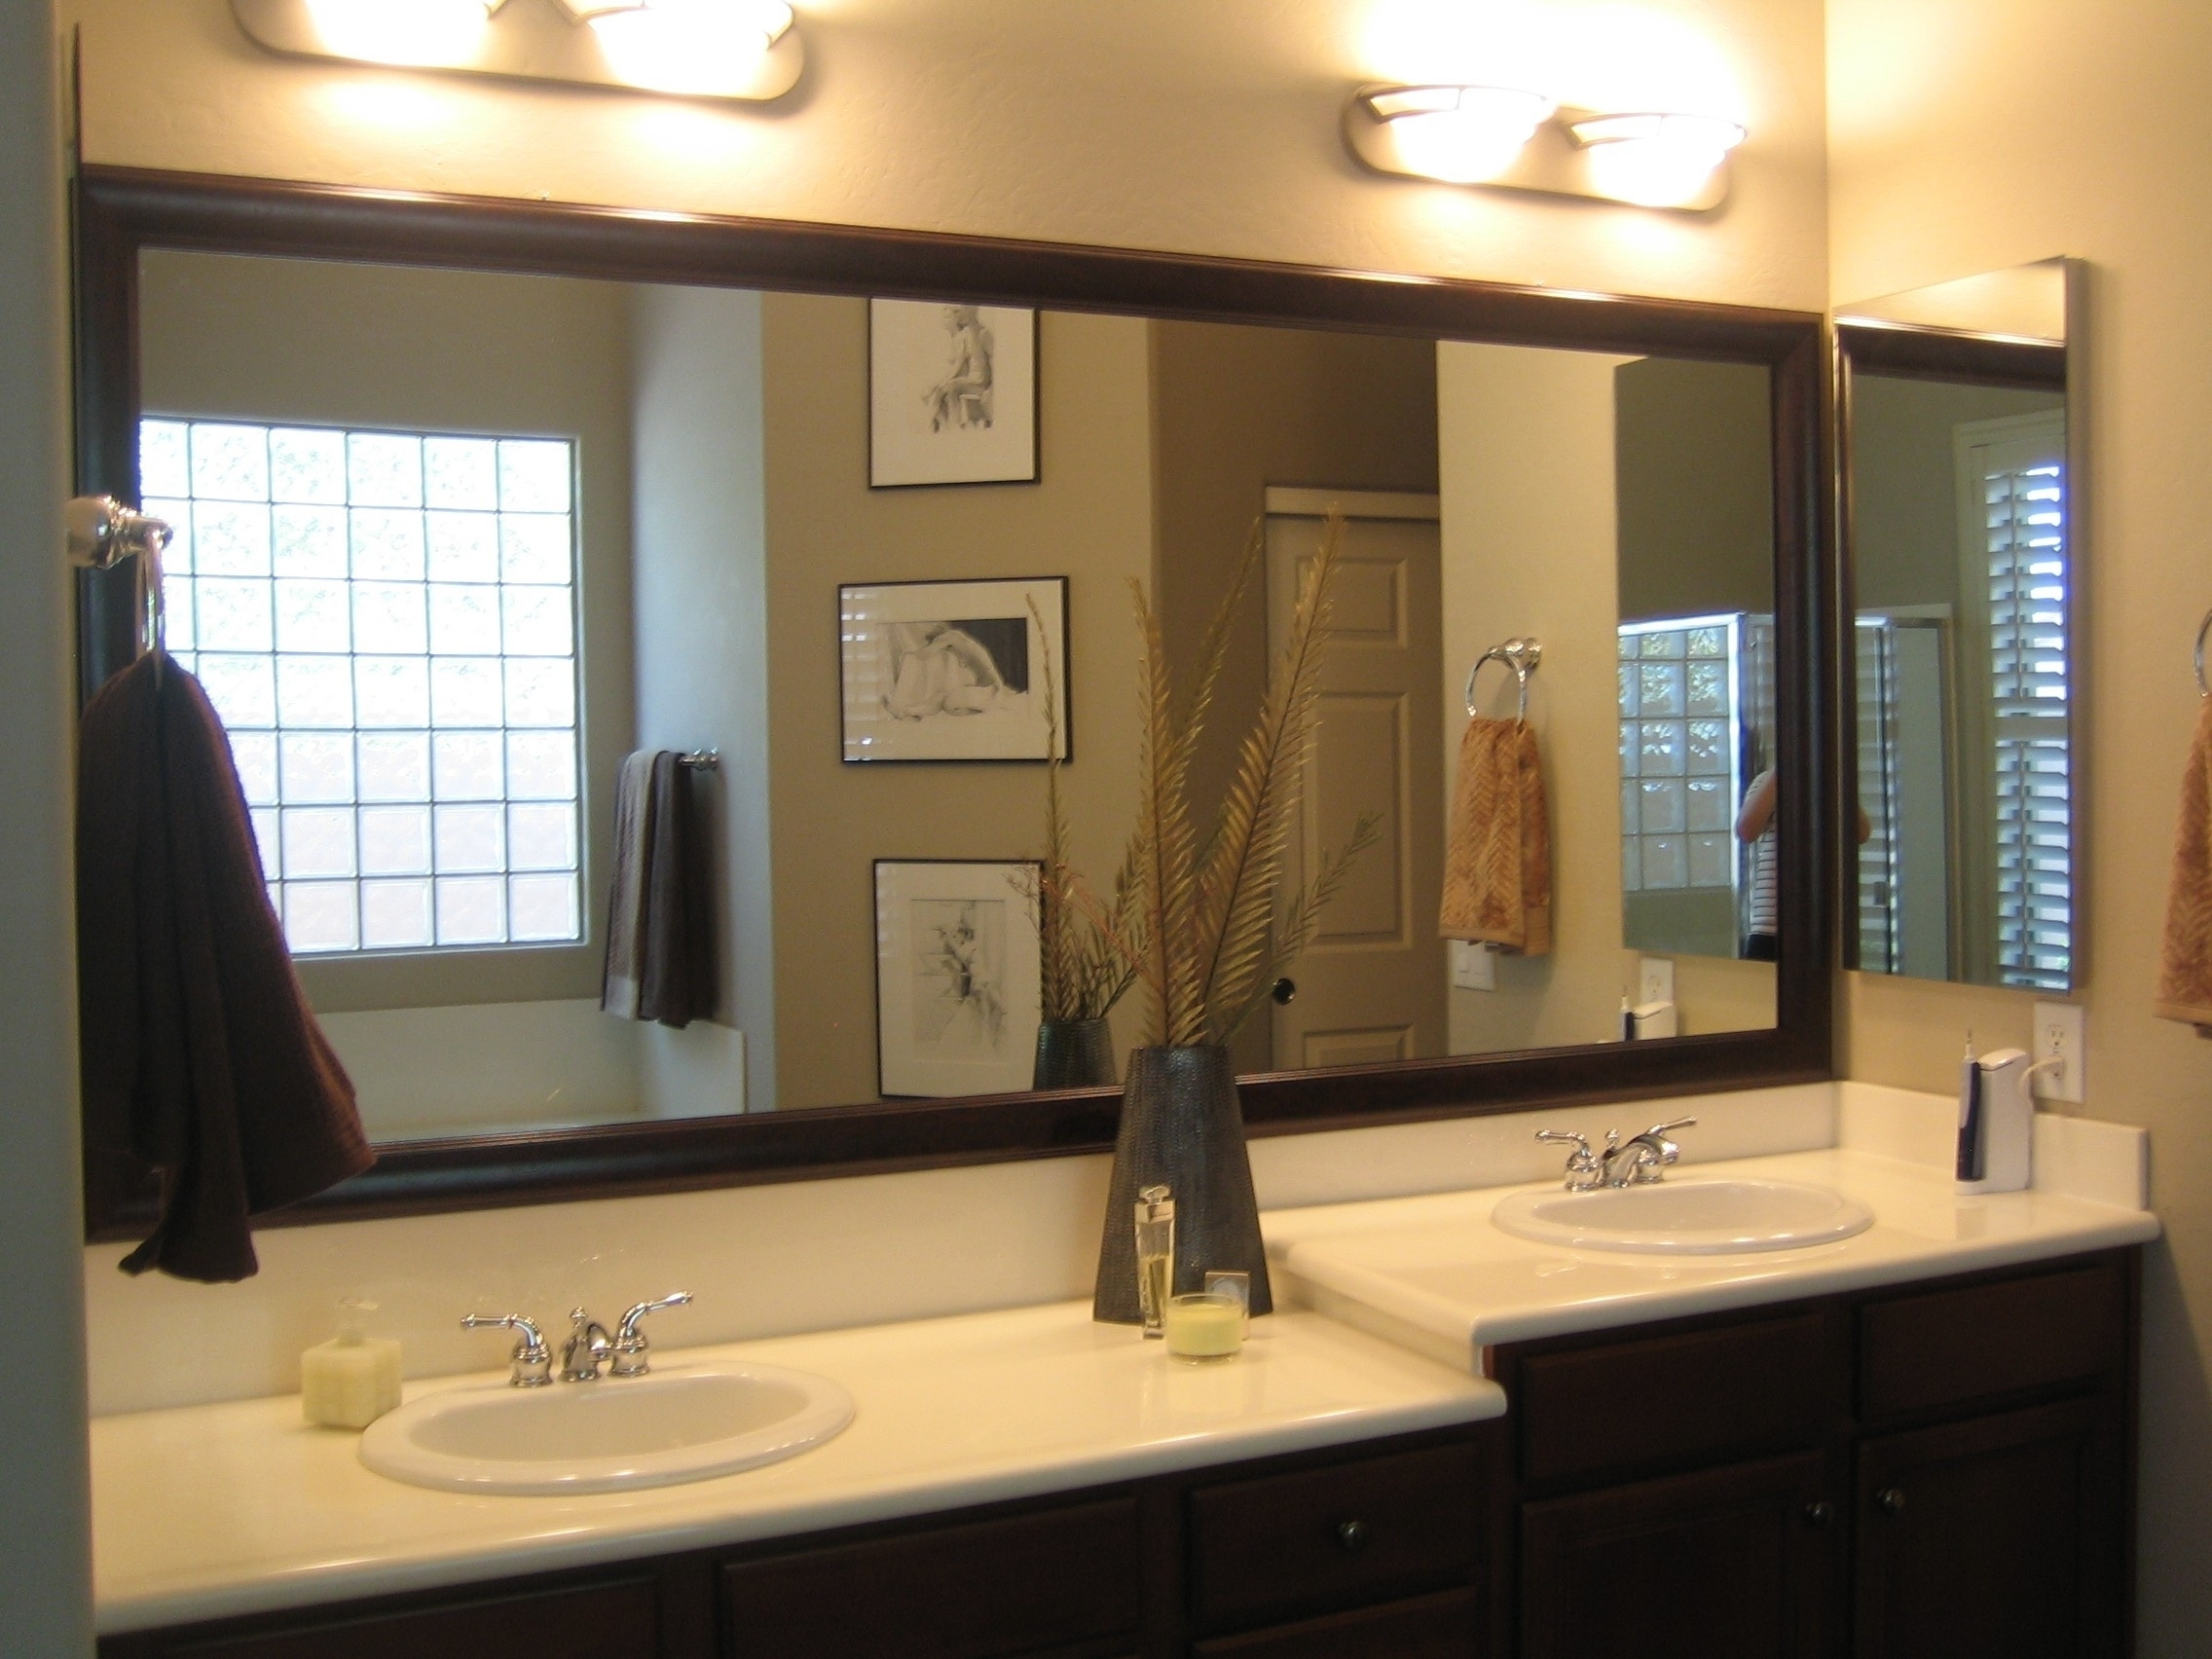 Bathroom Vanity With Mirror
 Bathroom mirrors separate or one big piece of glass